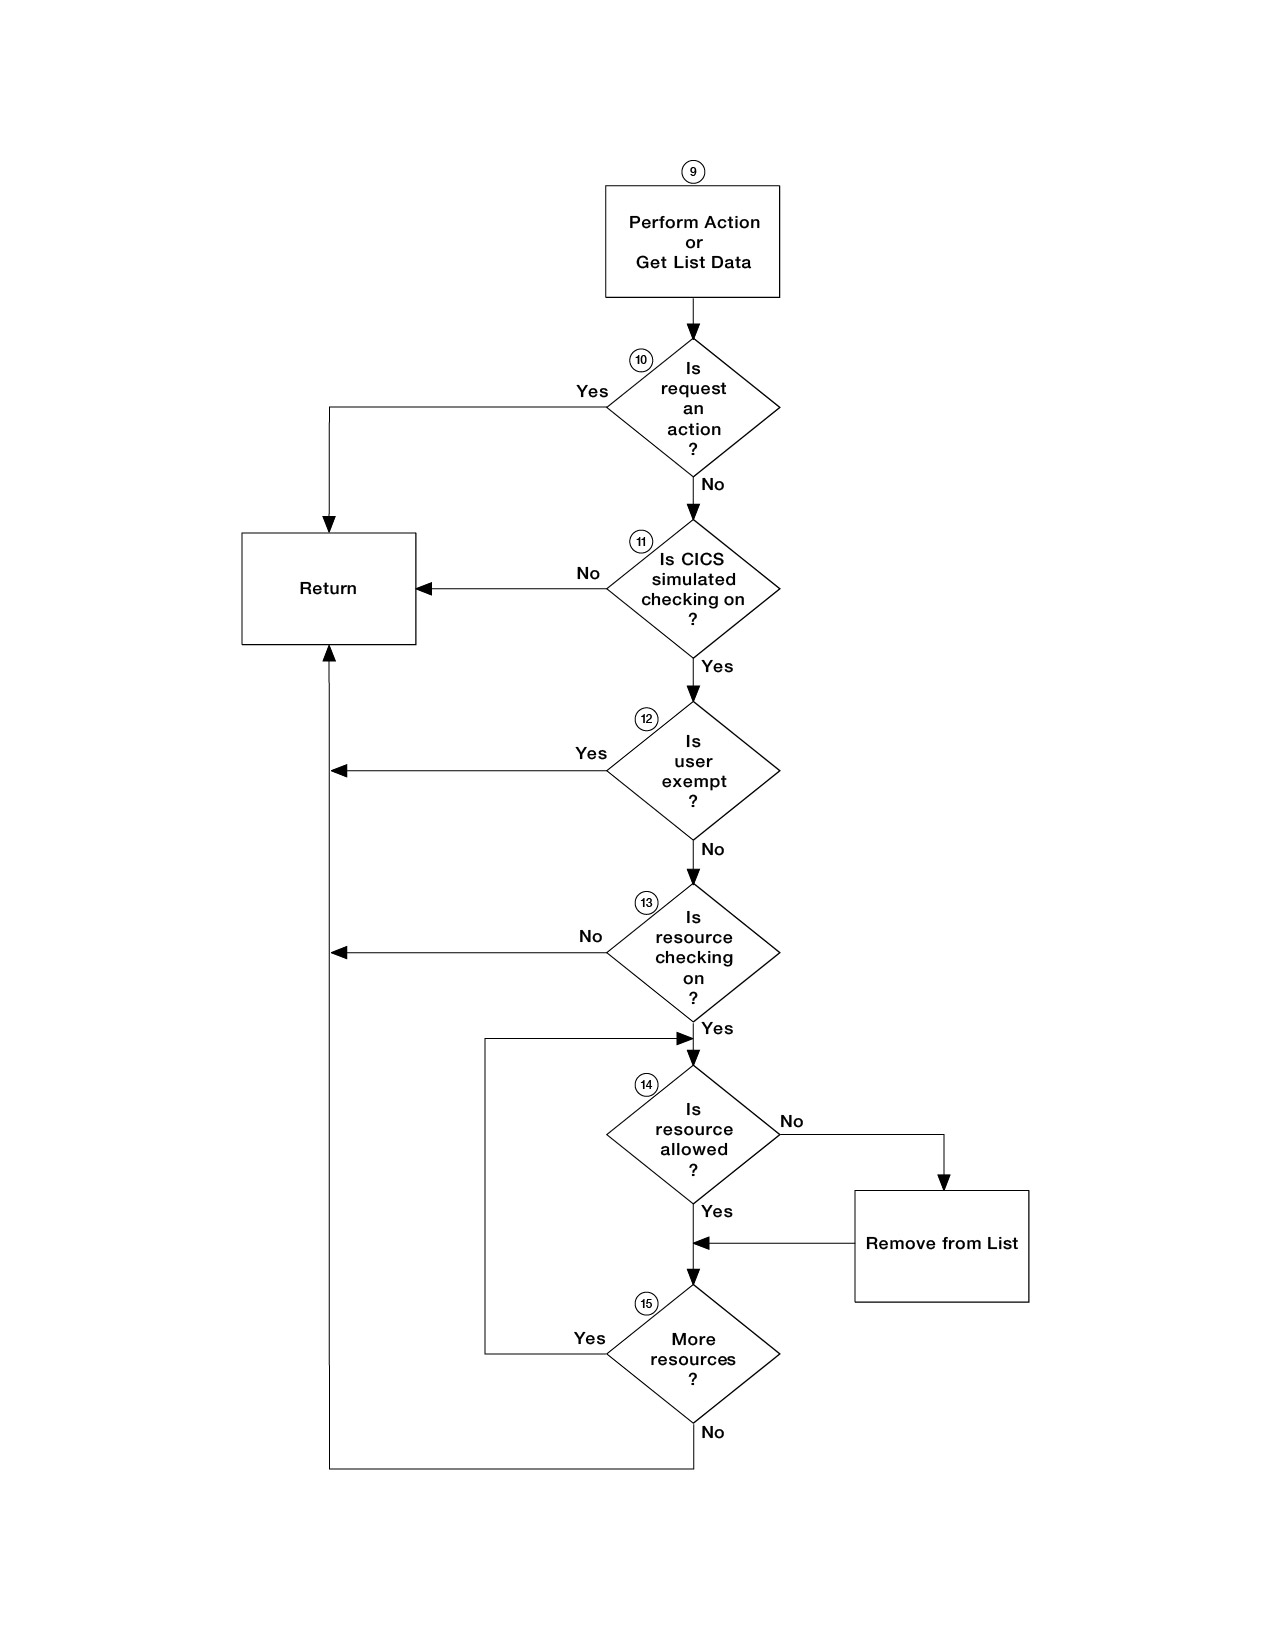 This flowchart shows the second part of the security checking sequence described in the text.